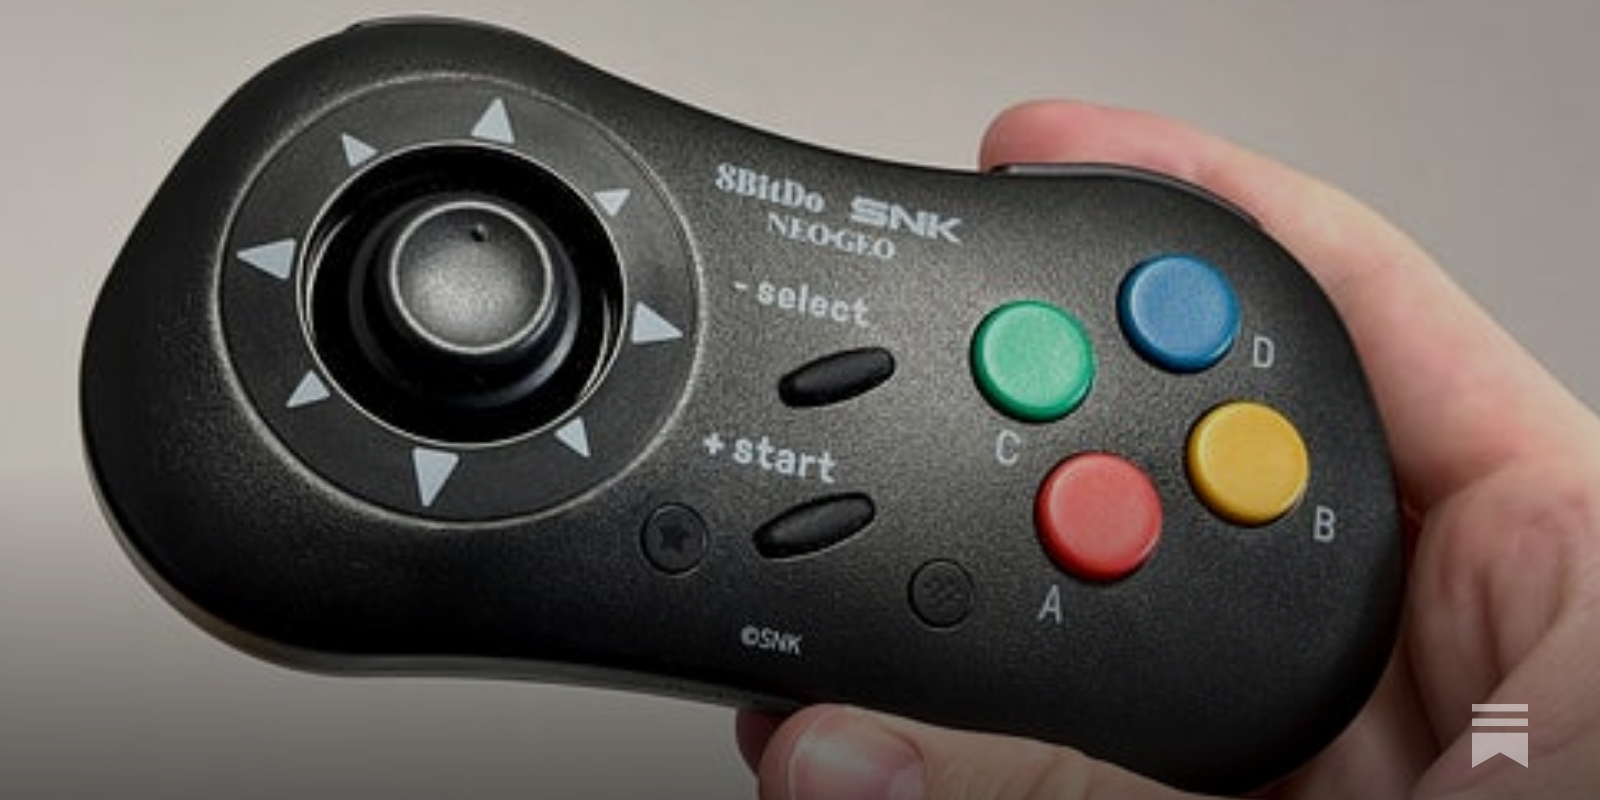 8BitDo NeoGeo Wireless Controller review - an exceptional